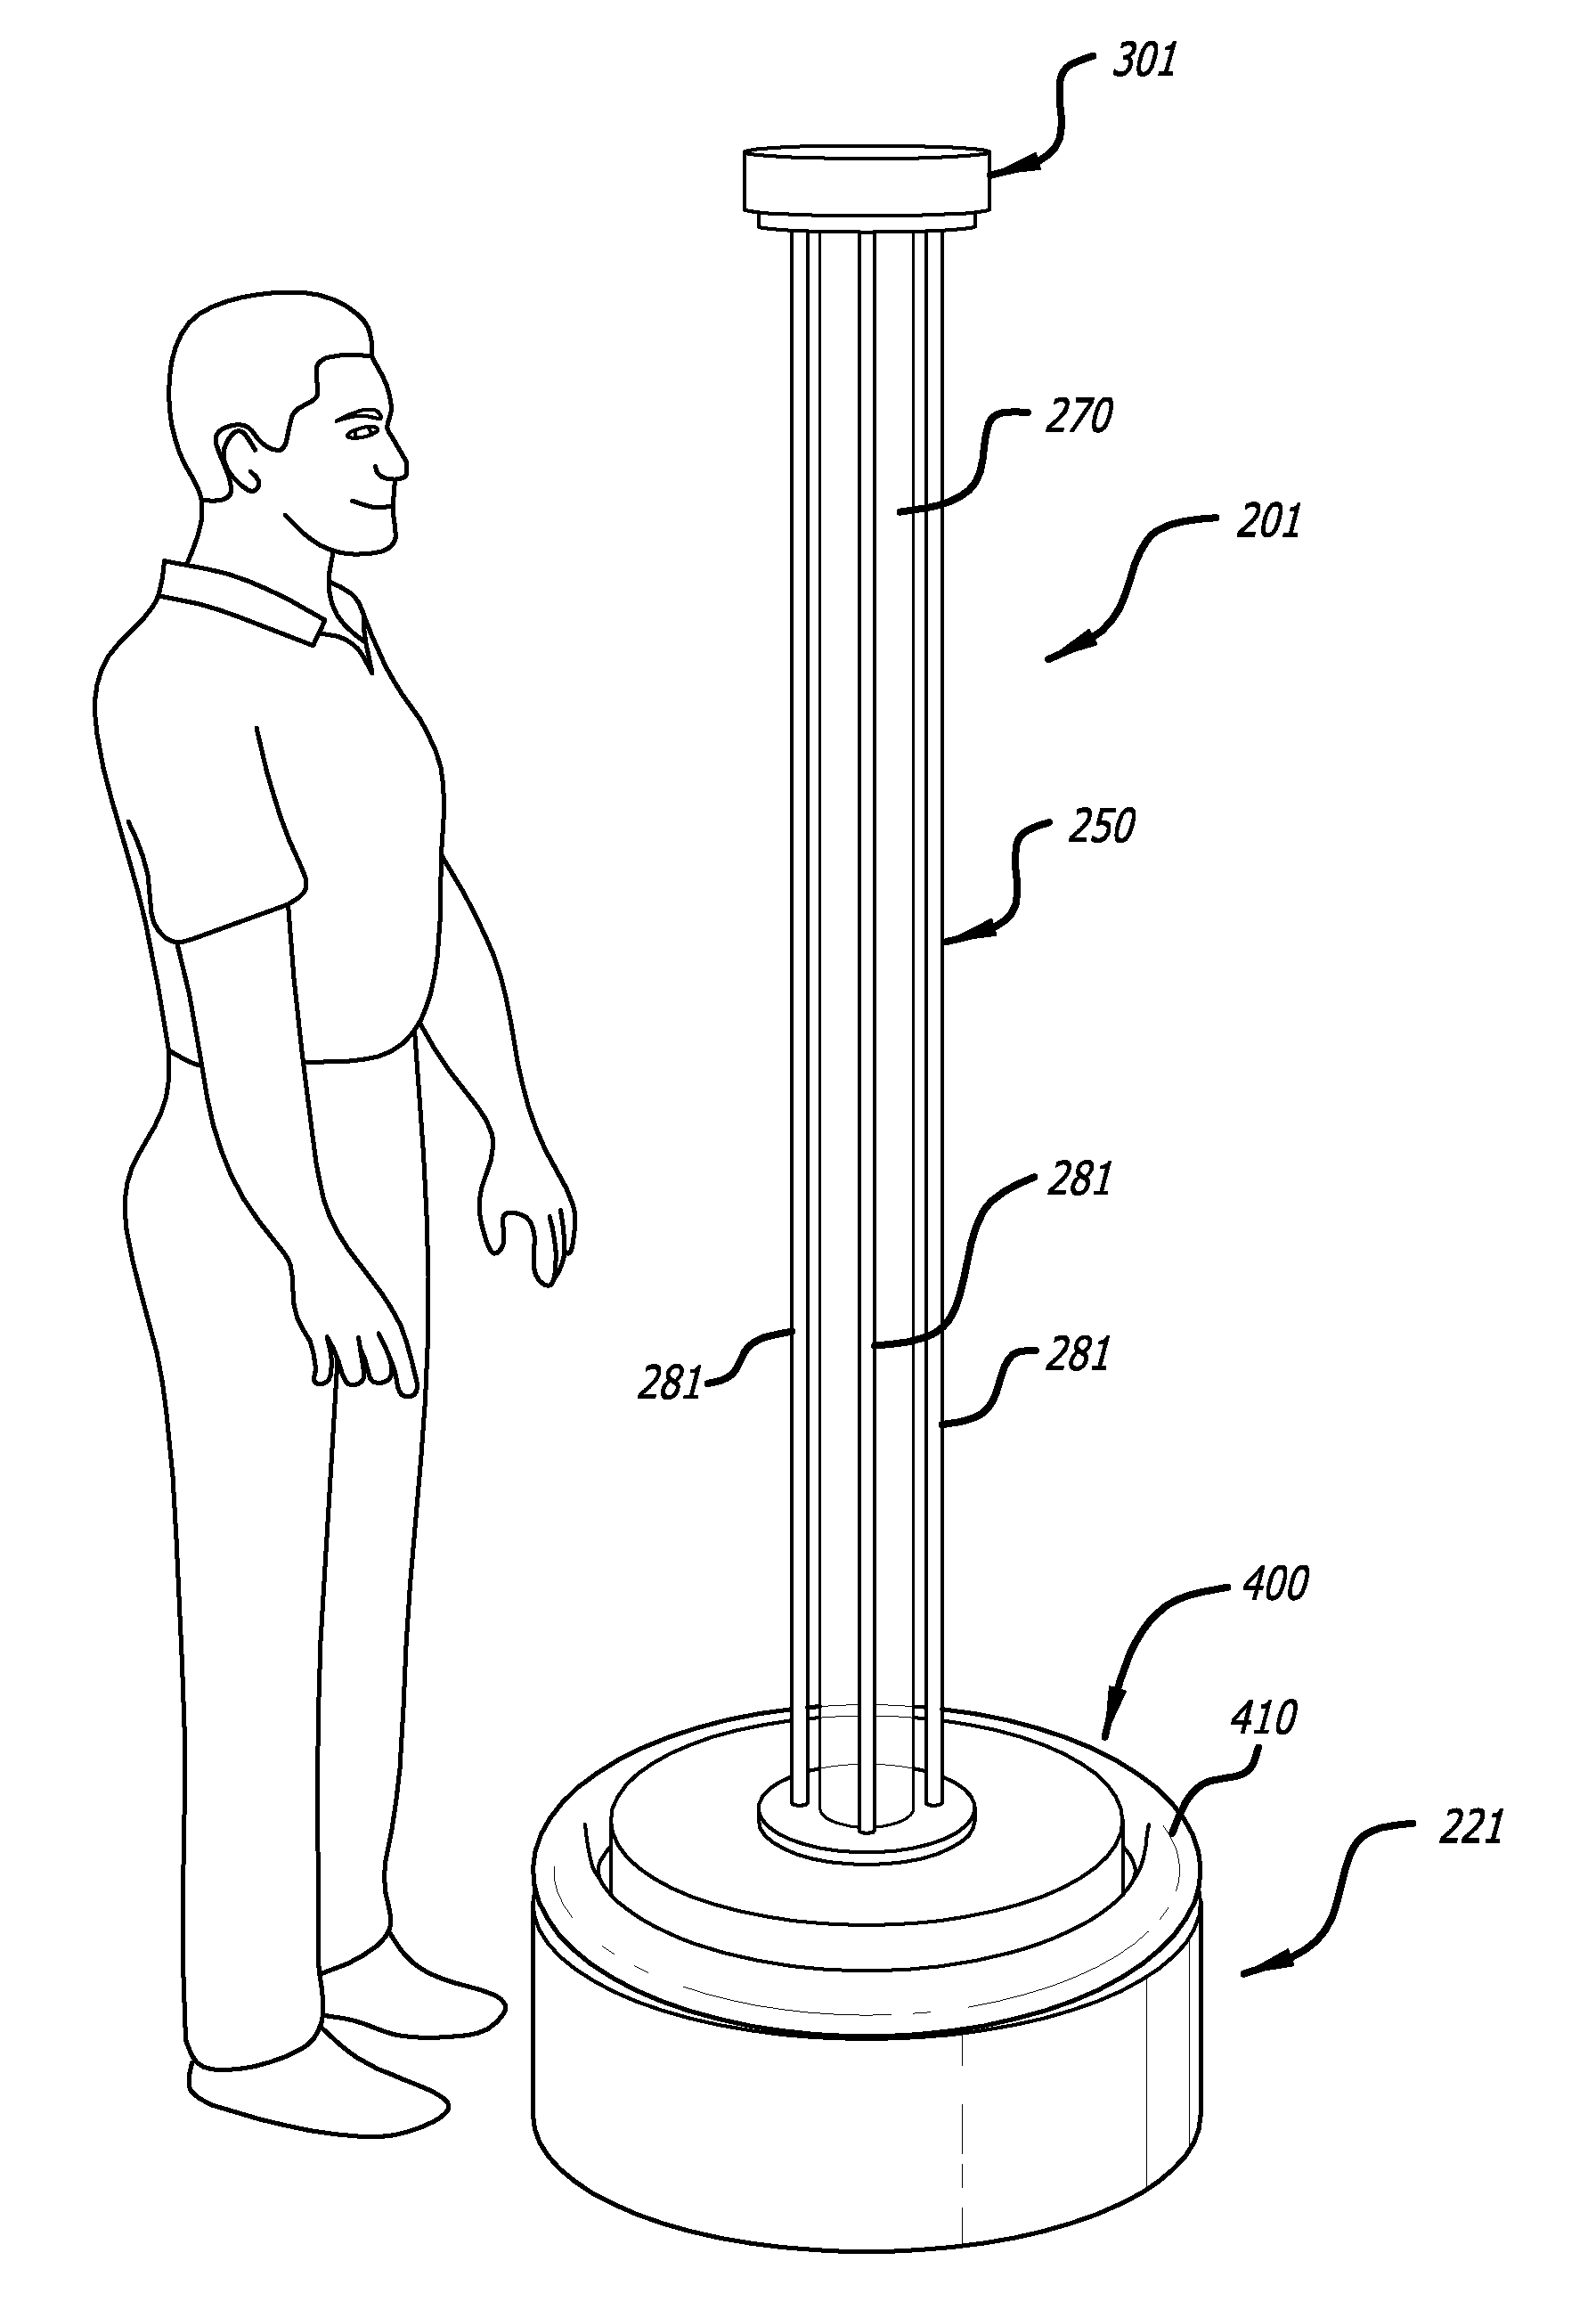 Hard-surface disinfection system